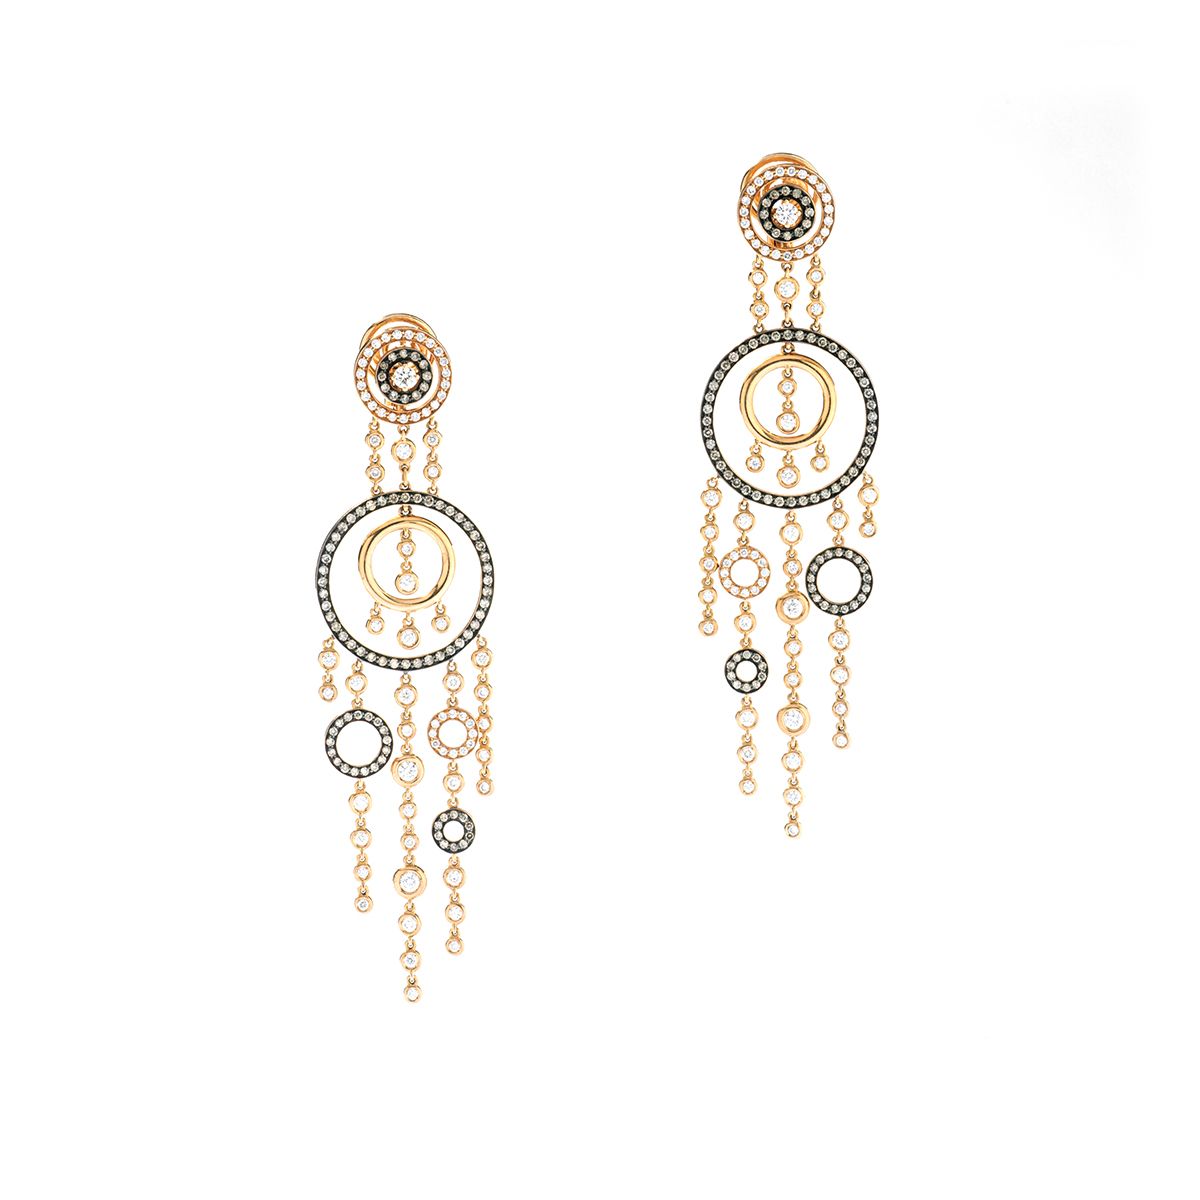 Null 18 ct yellow and black gold earrings with openwork circles of different siz&hellip;